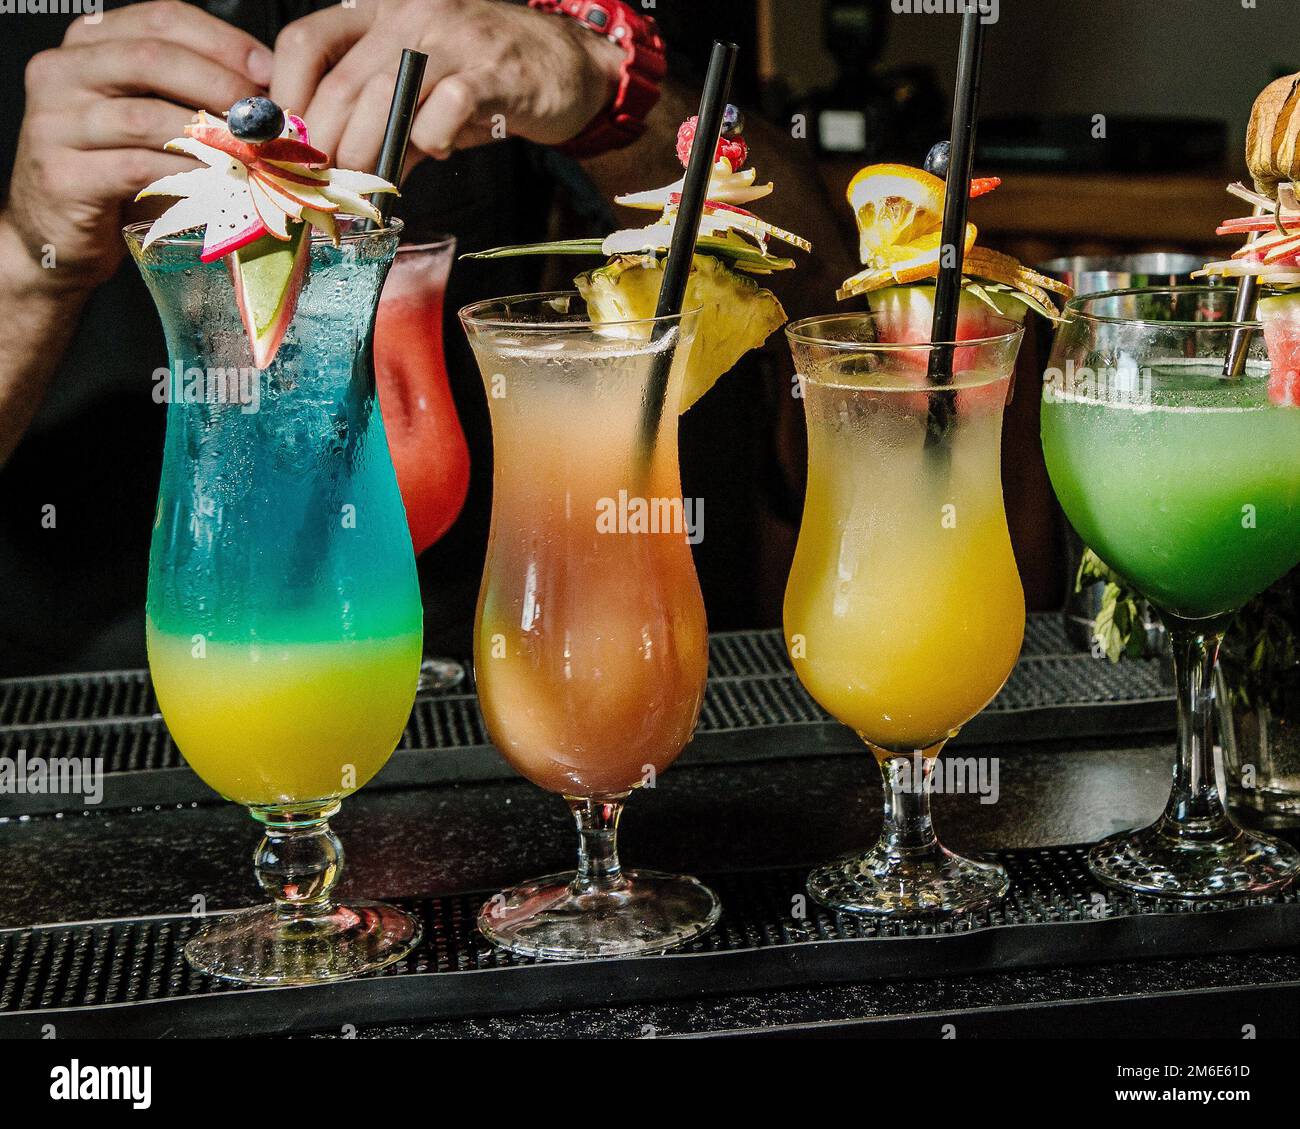 Cocktails drinks on the bar. Alcoholic cocktail row on bar table, colorful party drinks. Stock Photo